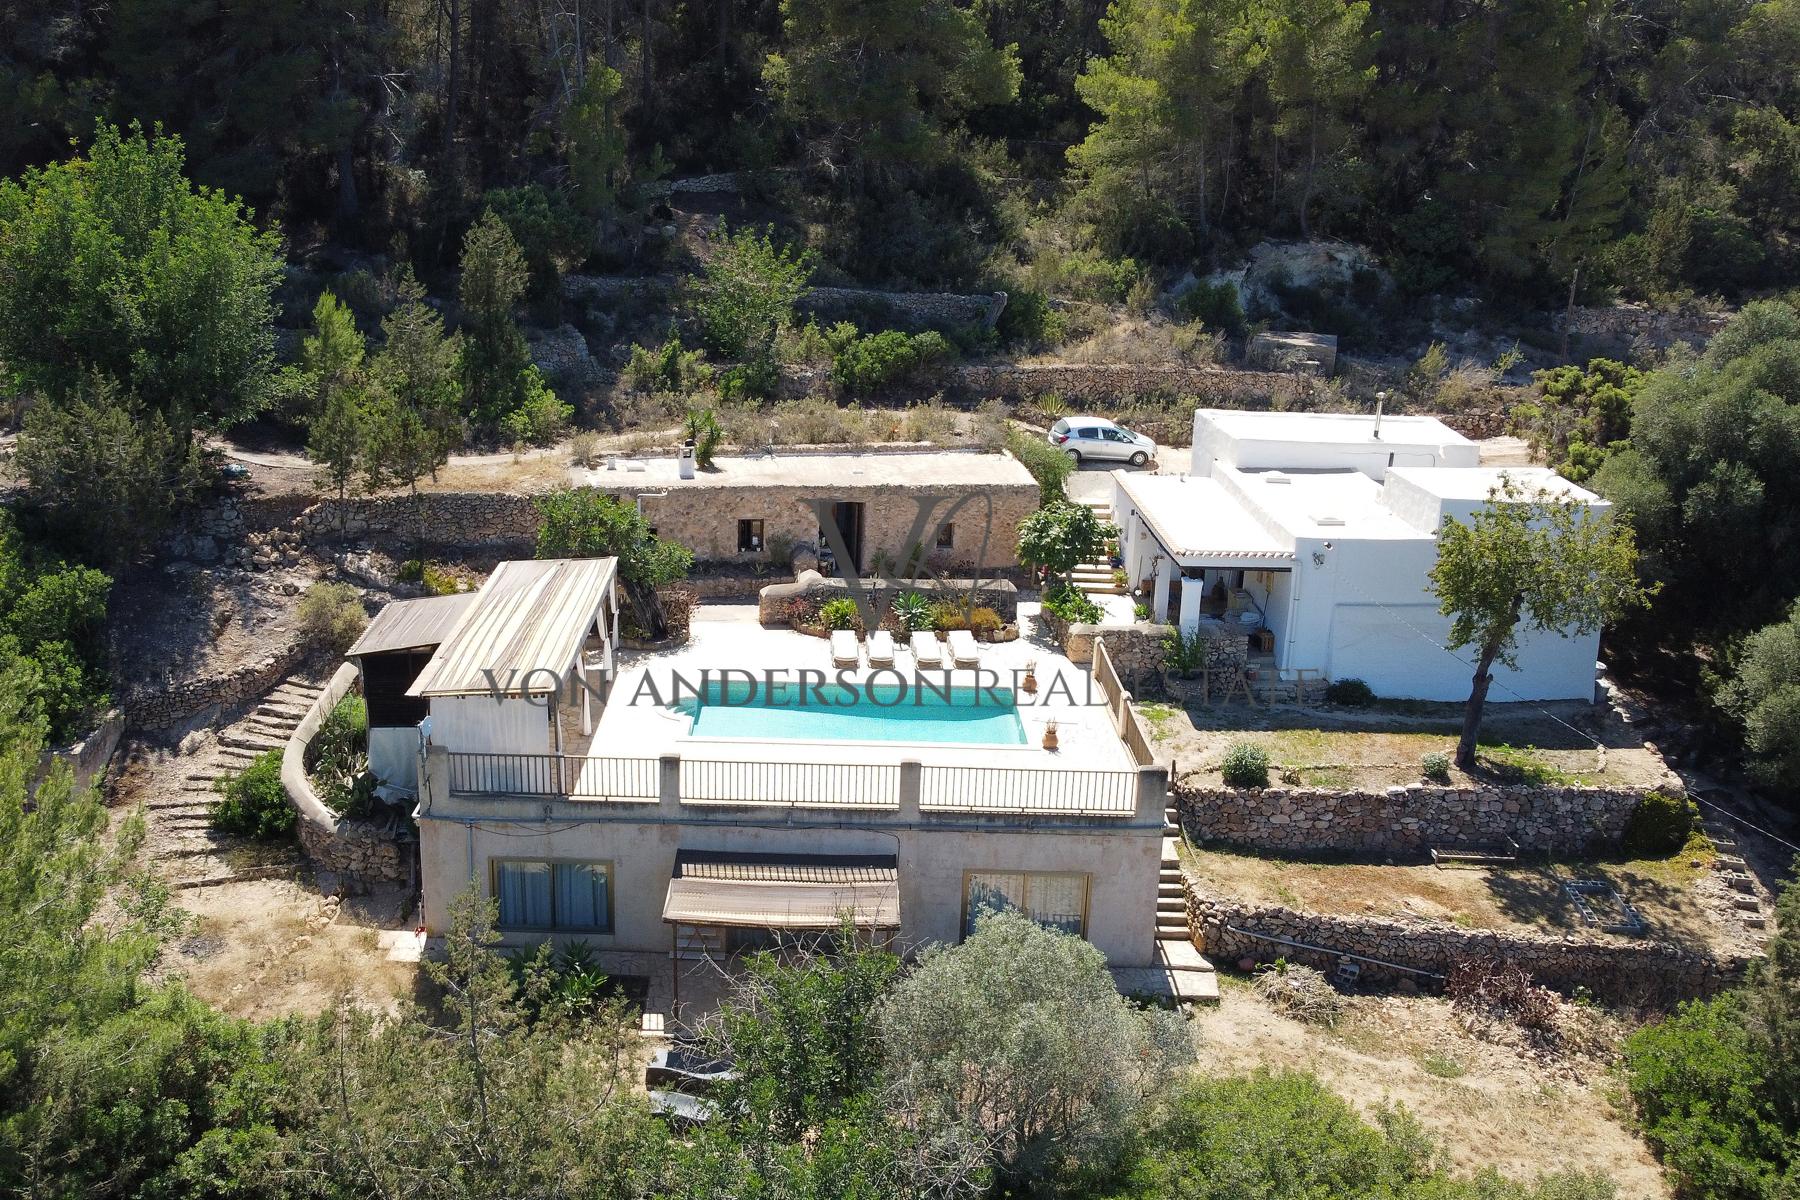 Charming Traditional Finca with 2 Separate Annexes in a Tranquil Rural Setting, ref. VA1060, for sale in Ibiza by Von Anderson Real Estate